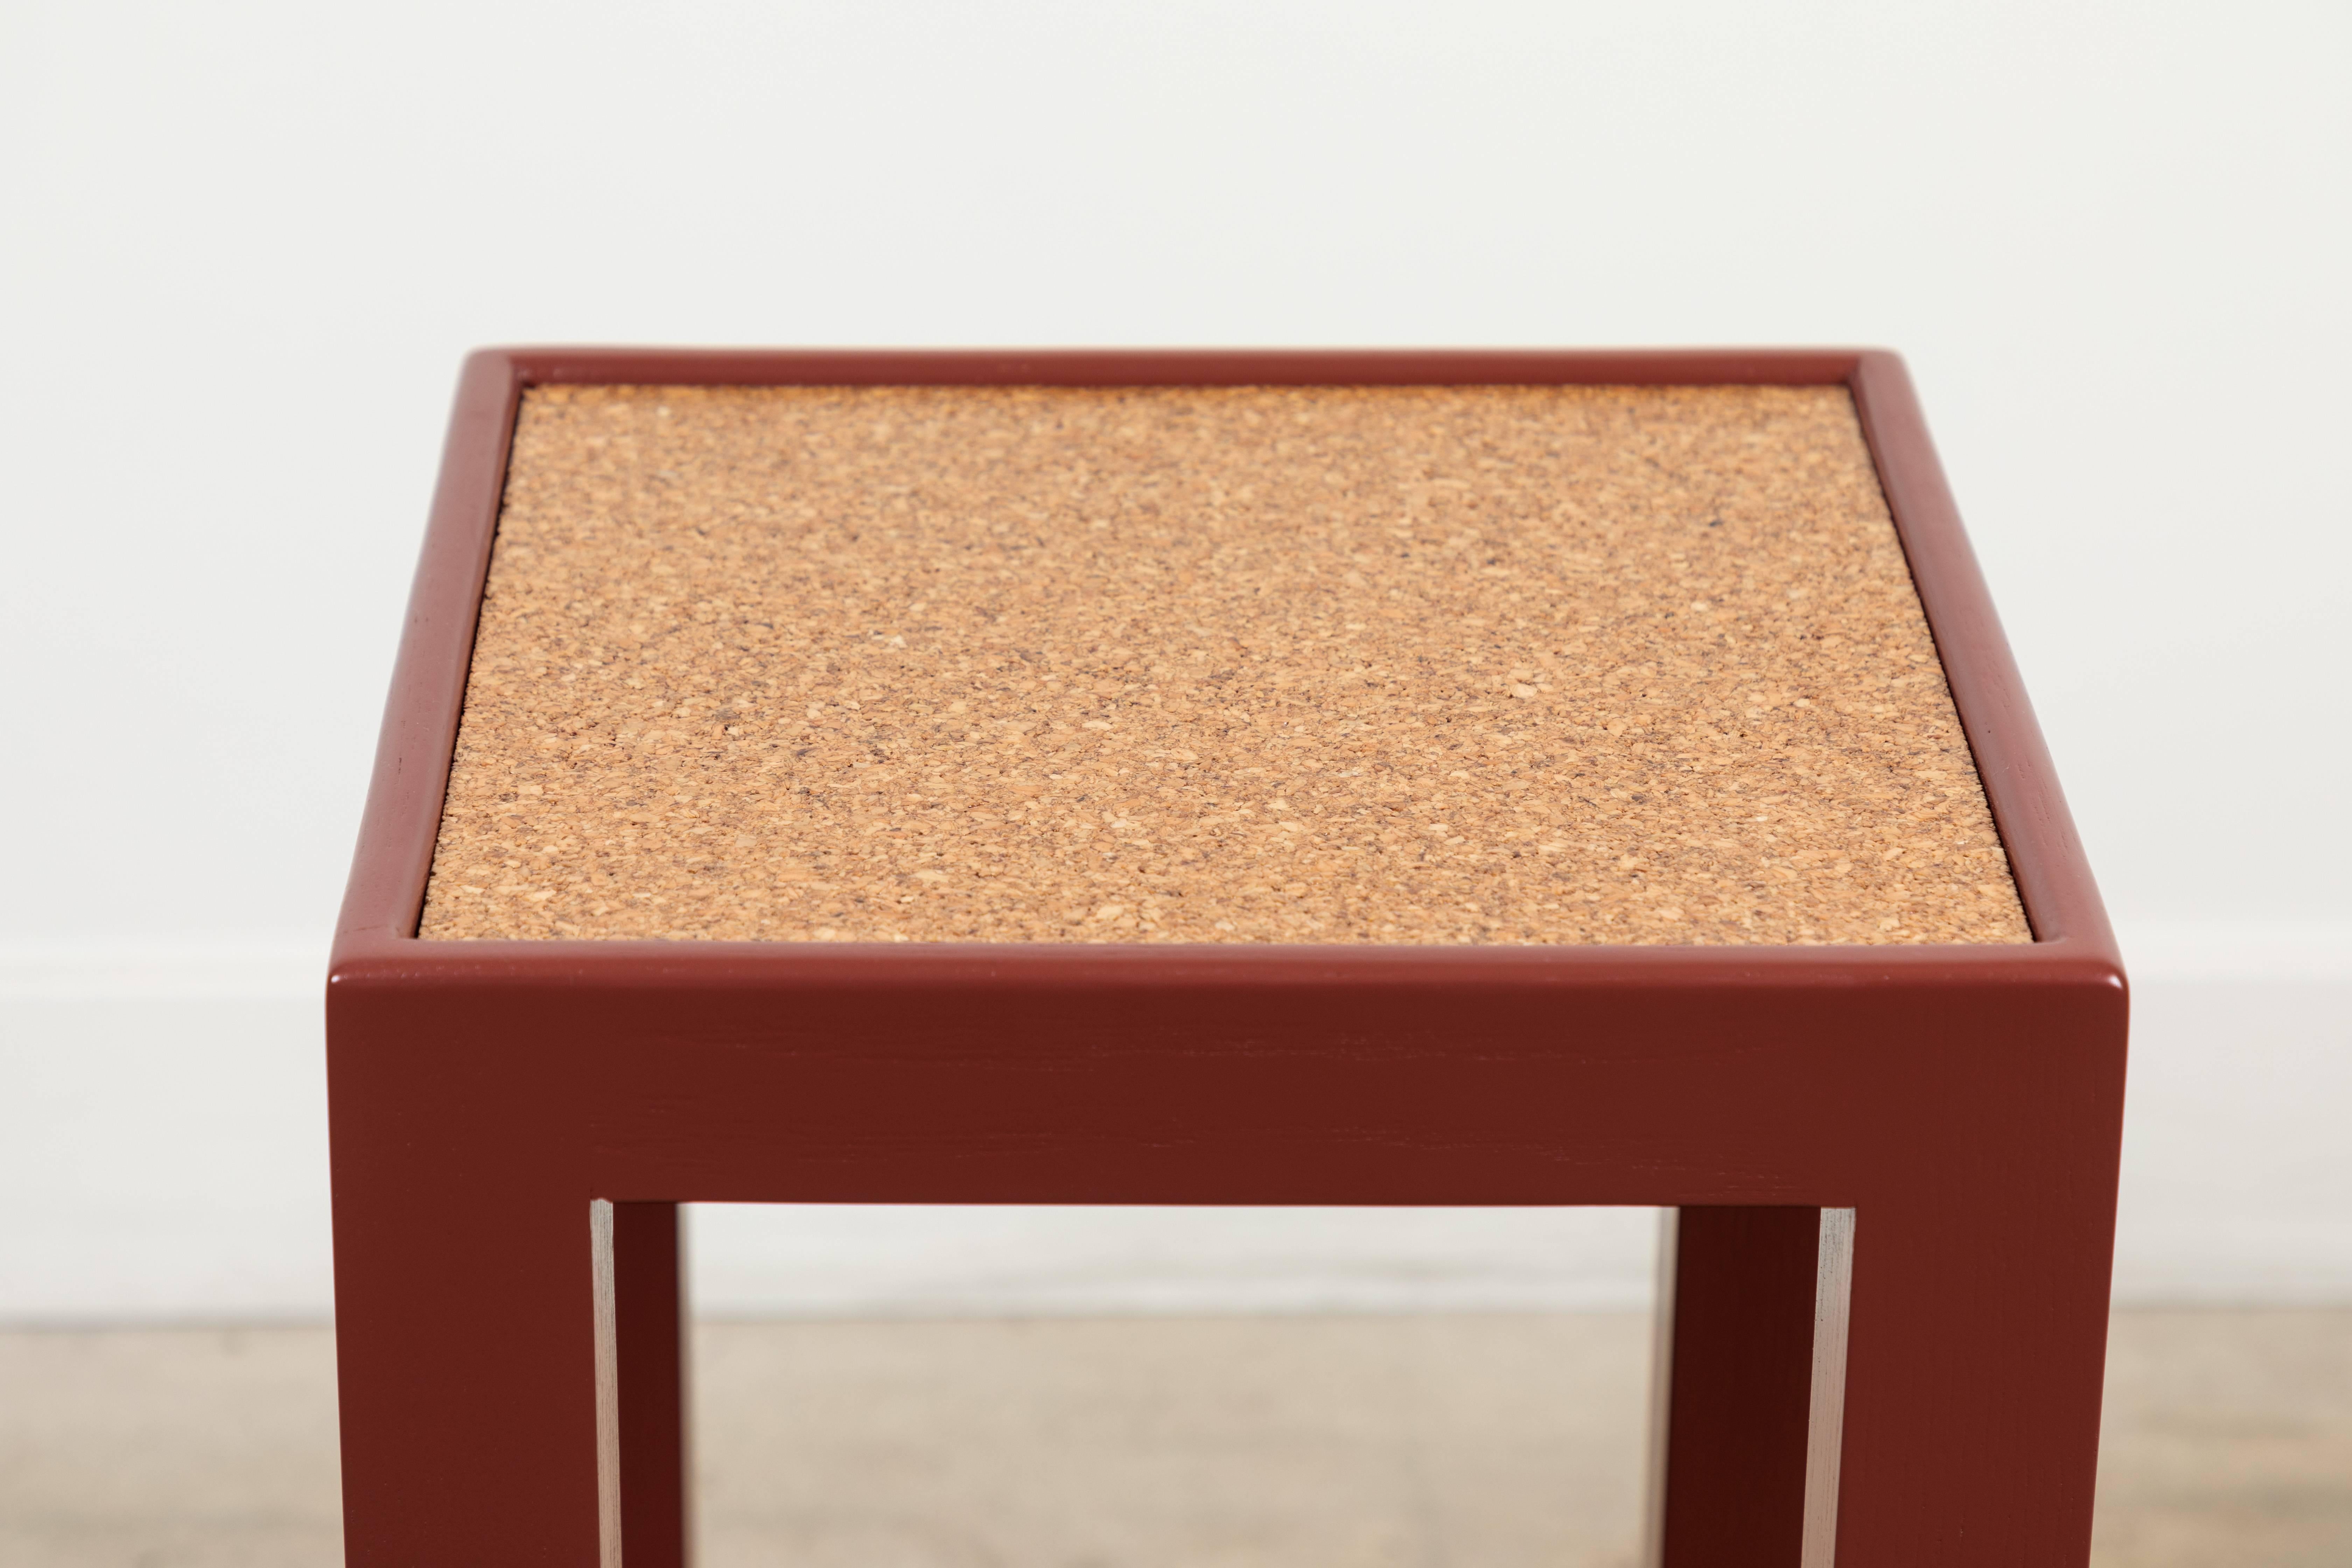 The Narrow Side Table is made of solid American walnut or white oak and features a lower shelf and your choice of a cork or bronze mirror top. Shown here in Burnt Russet Pigmented Oak and cork. 

Made to order in various finishes with a 10-12 week